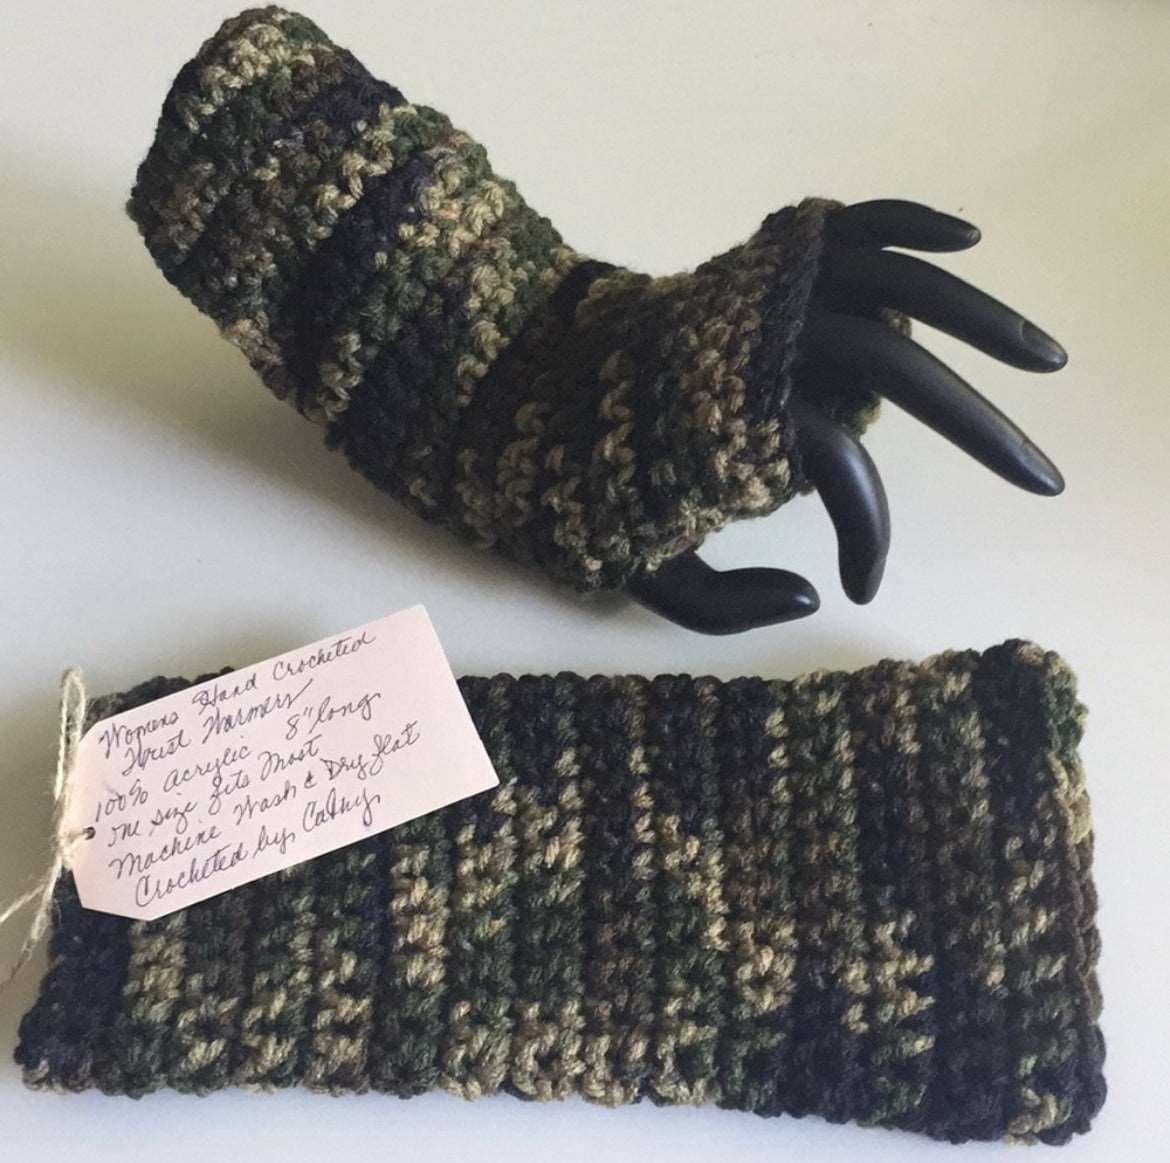 Camo Gaming Texting Fingerless Gloves Camouflage Marbled Dark Greens Browns Crochet Knit Fall Winter Writing Tech Wrist Warmers